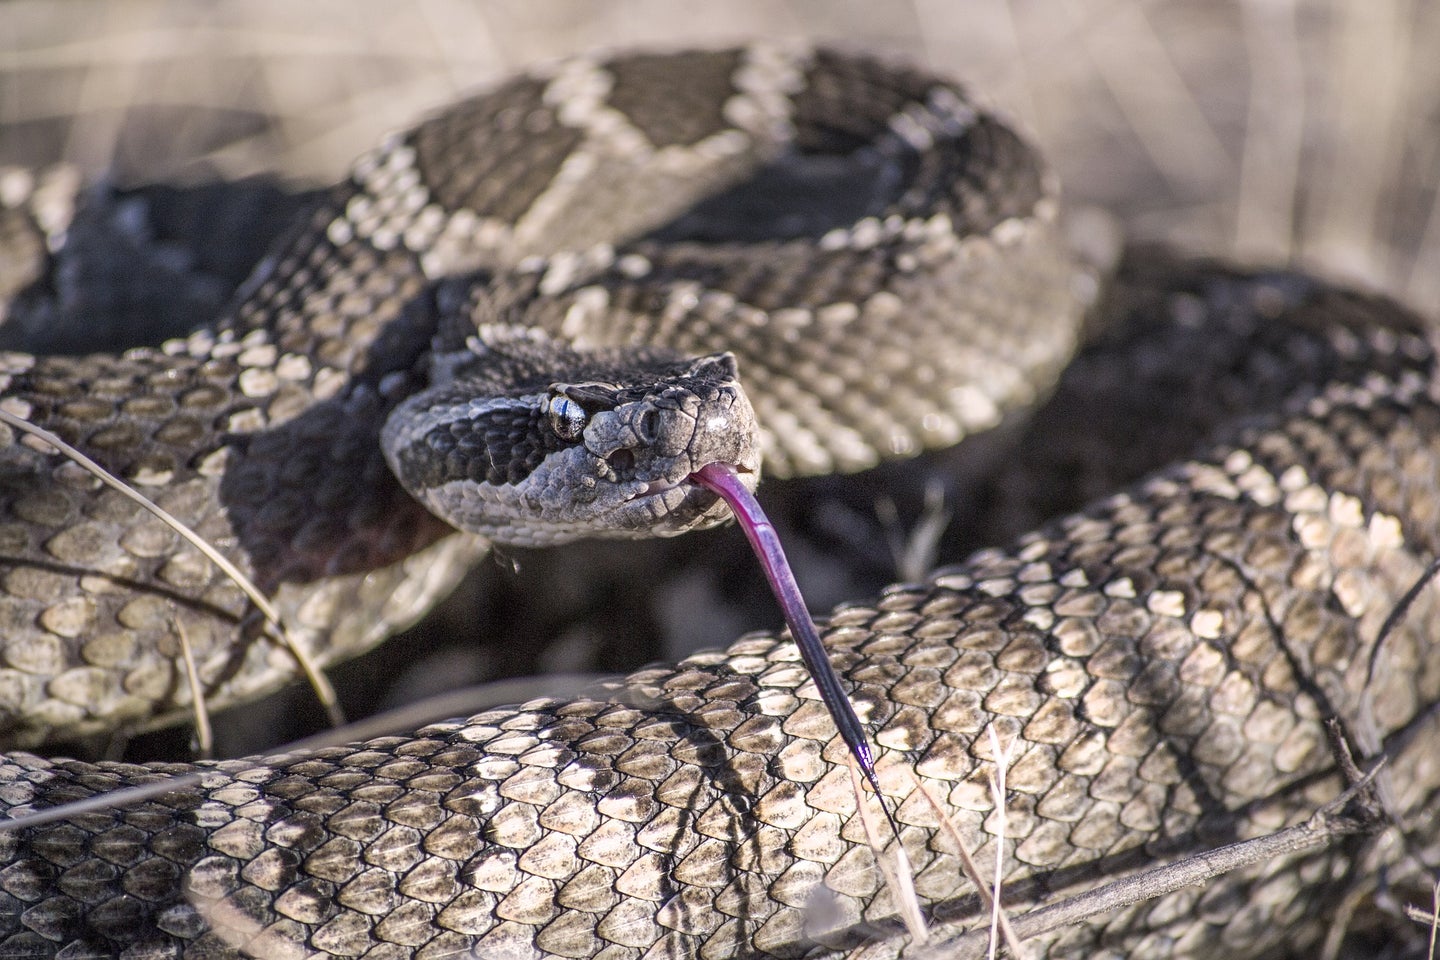 A coiled up rattlesnake ready to strike.